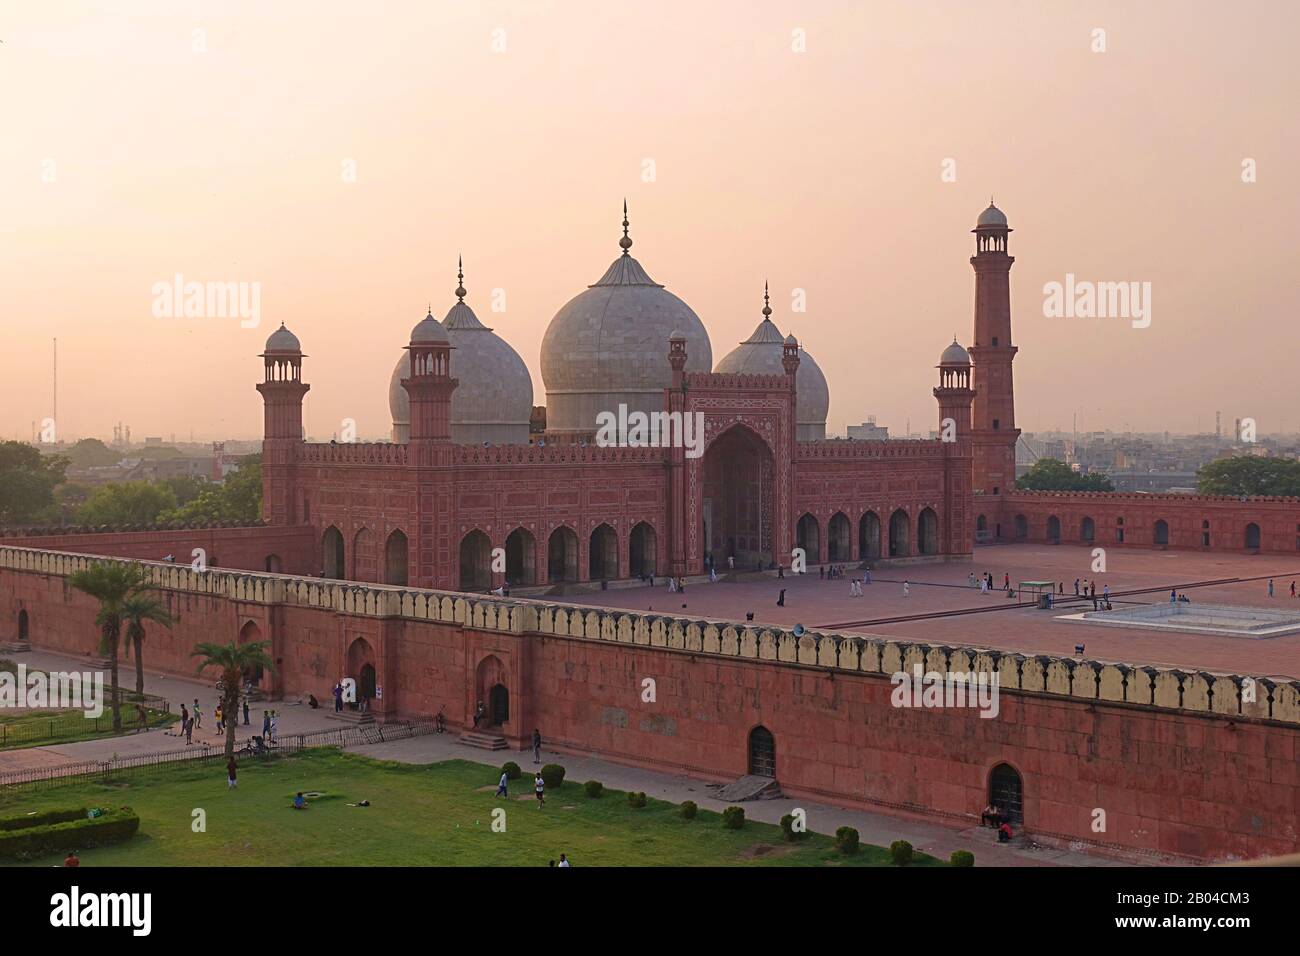 Sunset over the Domes of the The Badshahi Mosque (Emperor Mosque ) built in 1673 by the Mughal Emperor Aurangzeb in Lahore, Pakistan Stock Photo